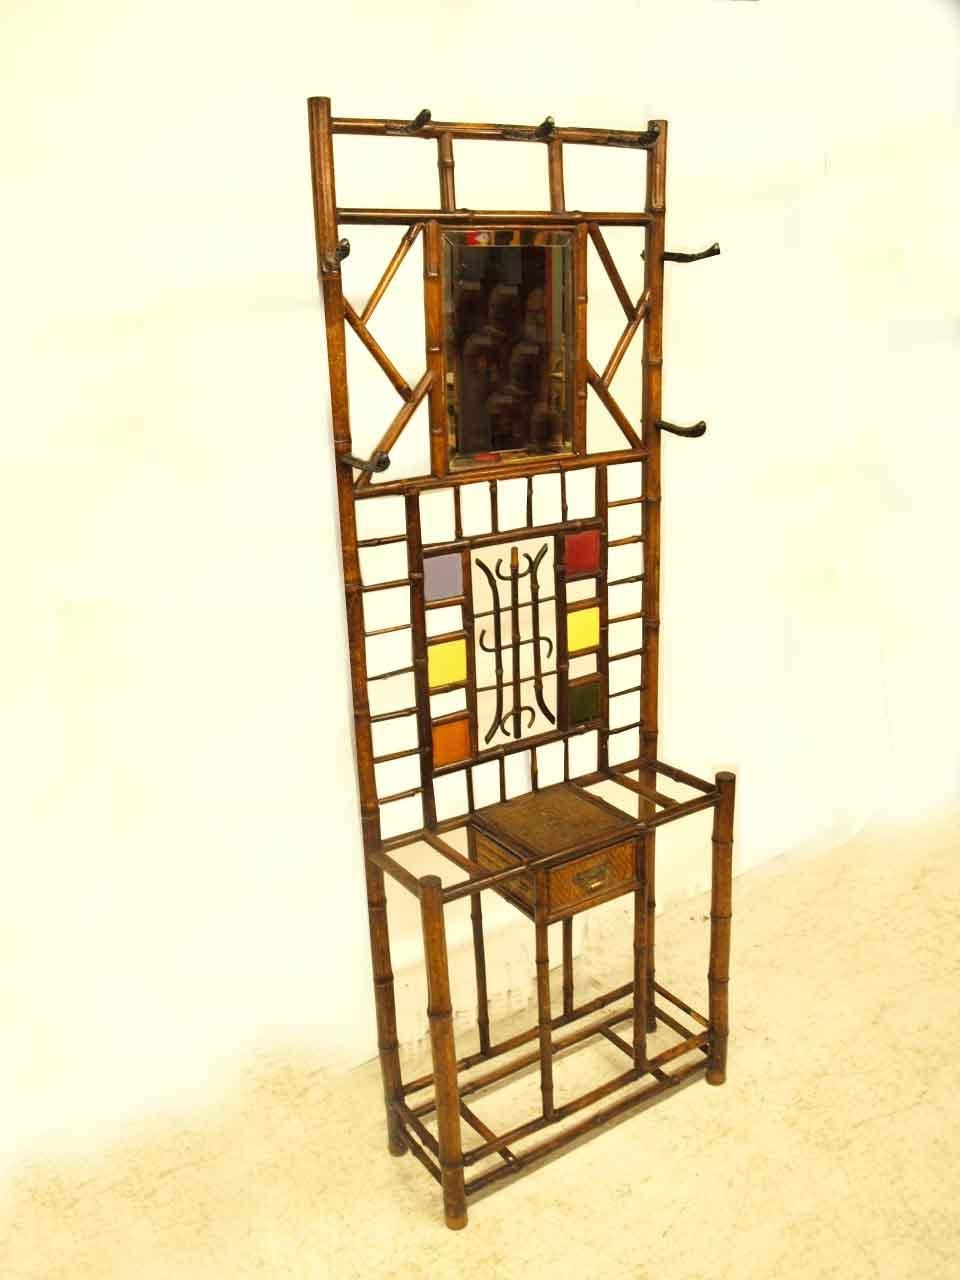 English bamboo hall stand with original steel hat hooks in simulated bamboo design, original beveled glass mirror, middle portion with multicolored tiles surrounding creative bamboo centerpiece; lower portion with single drawer.